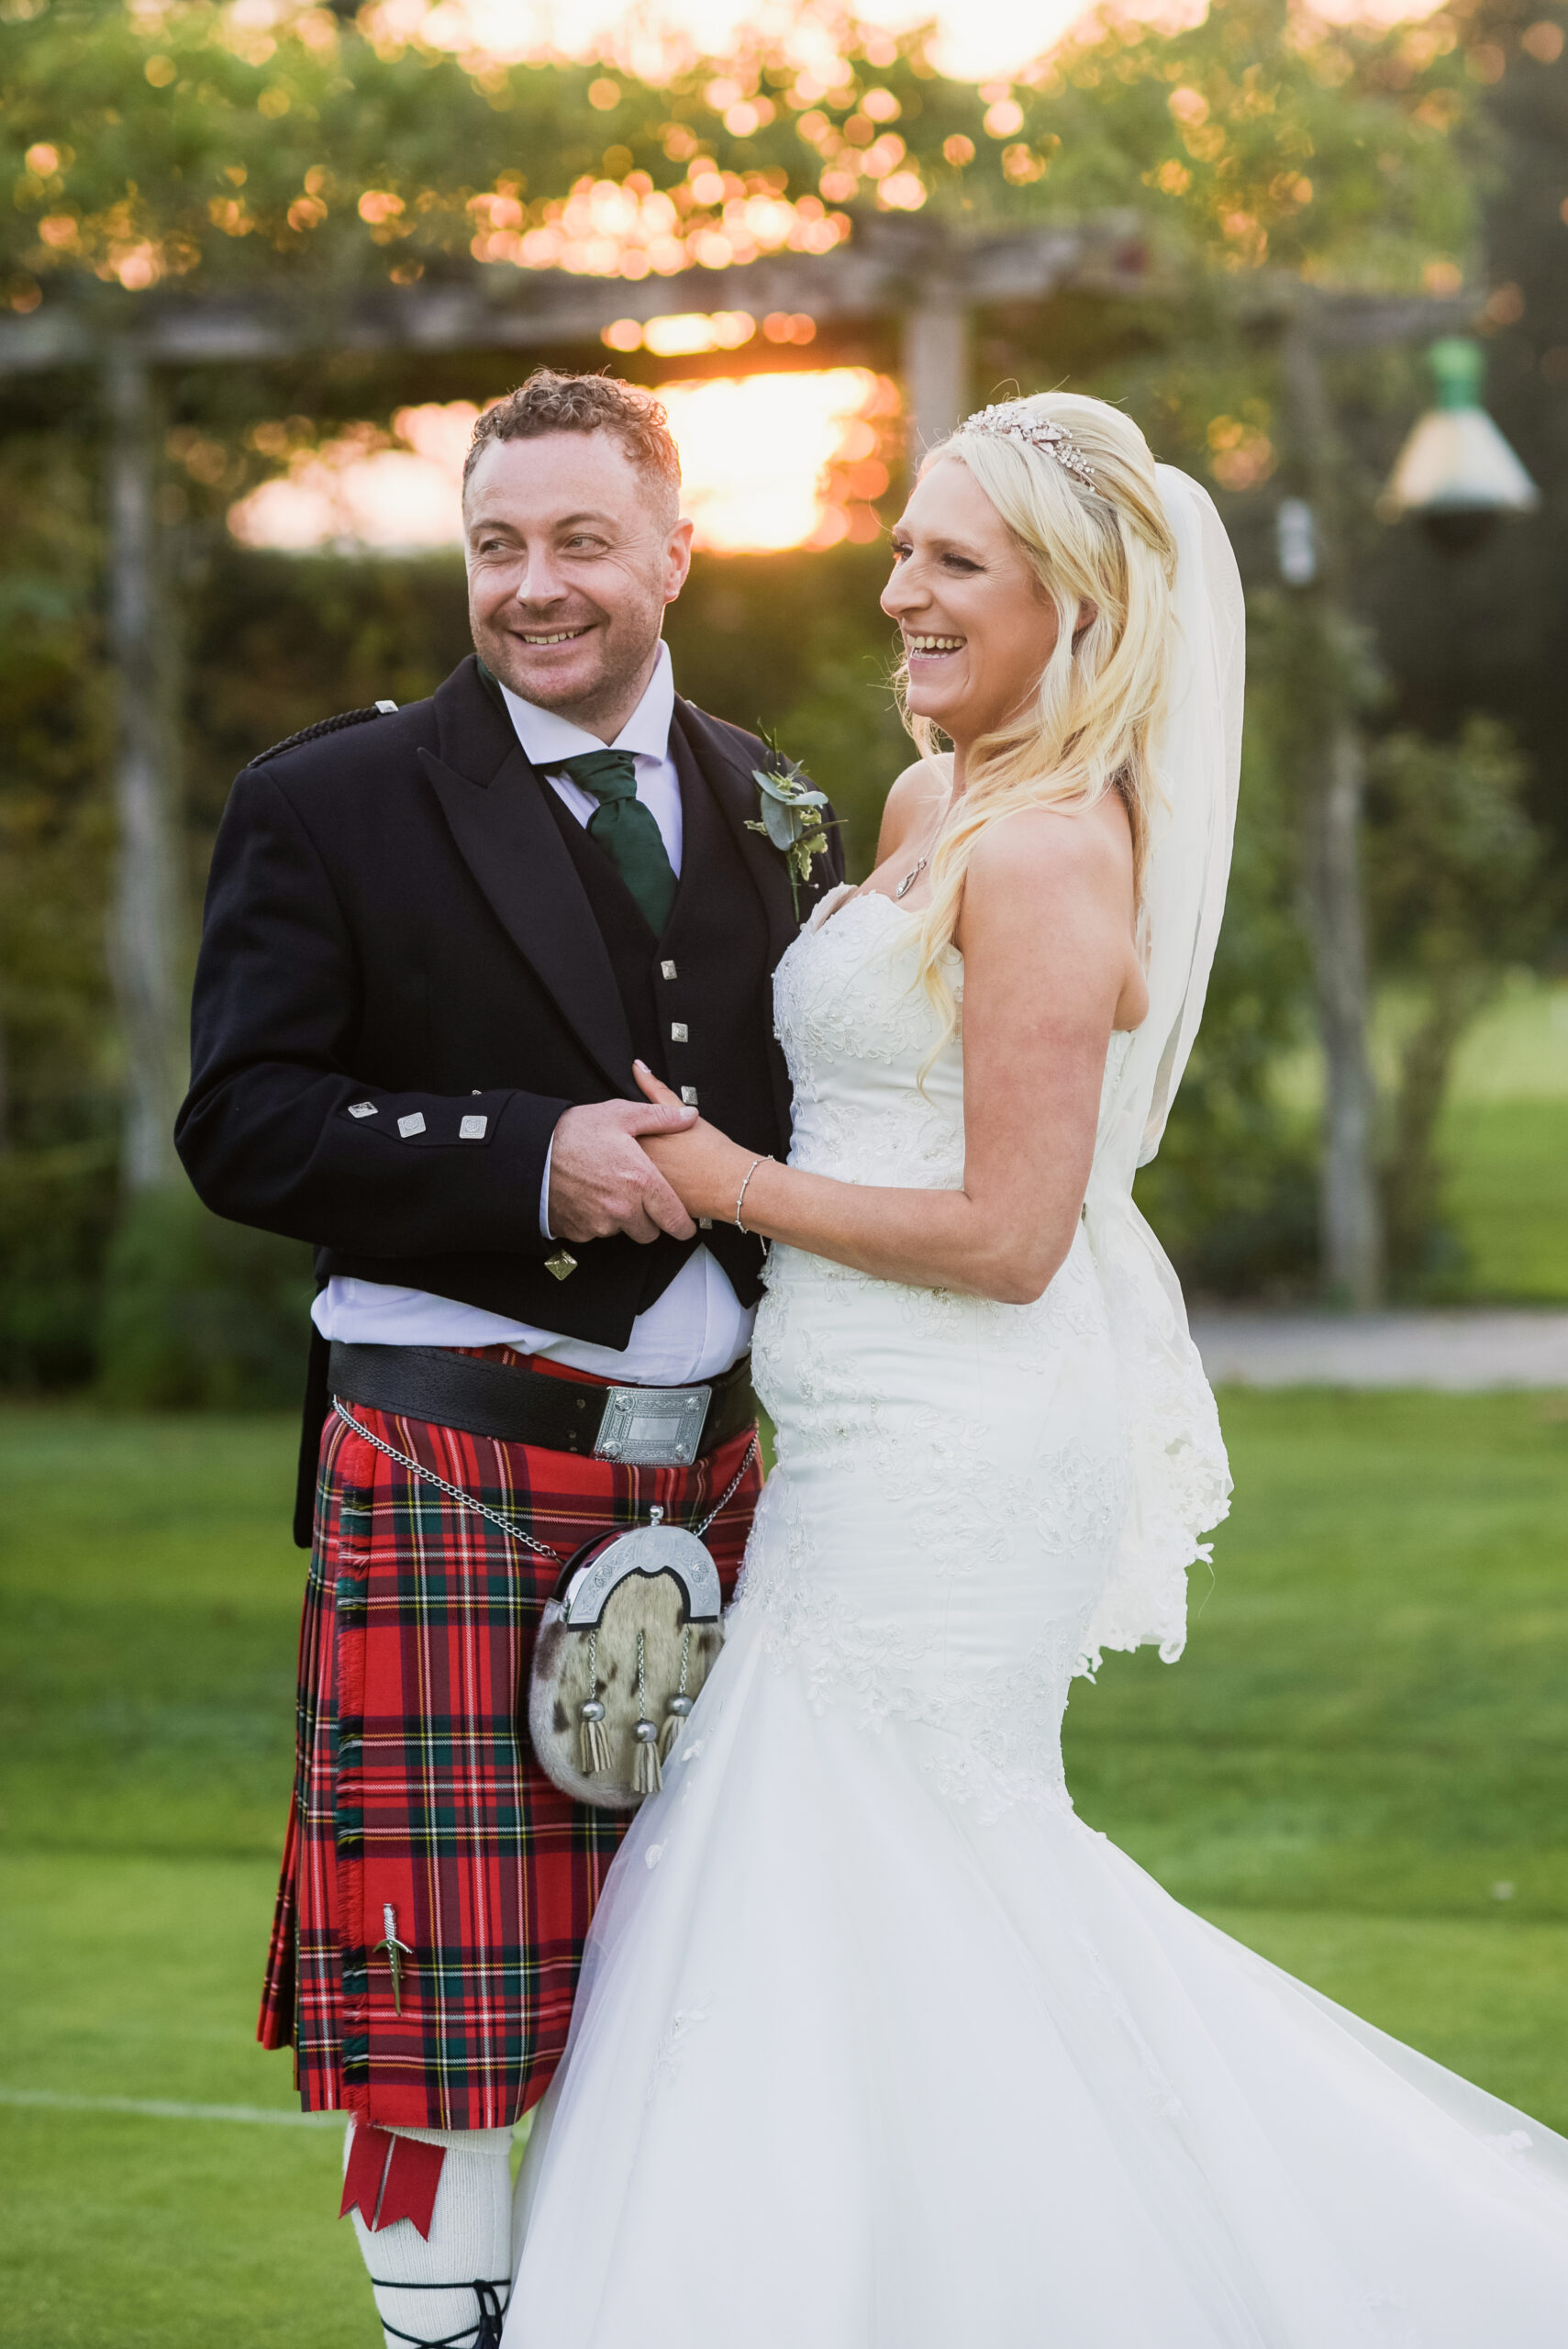 Sunset Wedding Photography at Park House Hotel & Spa